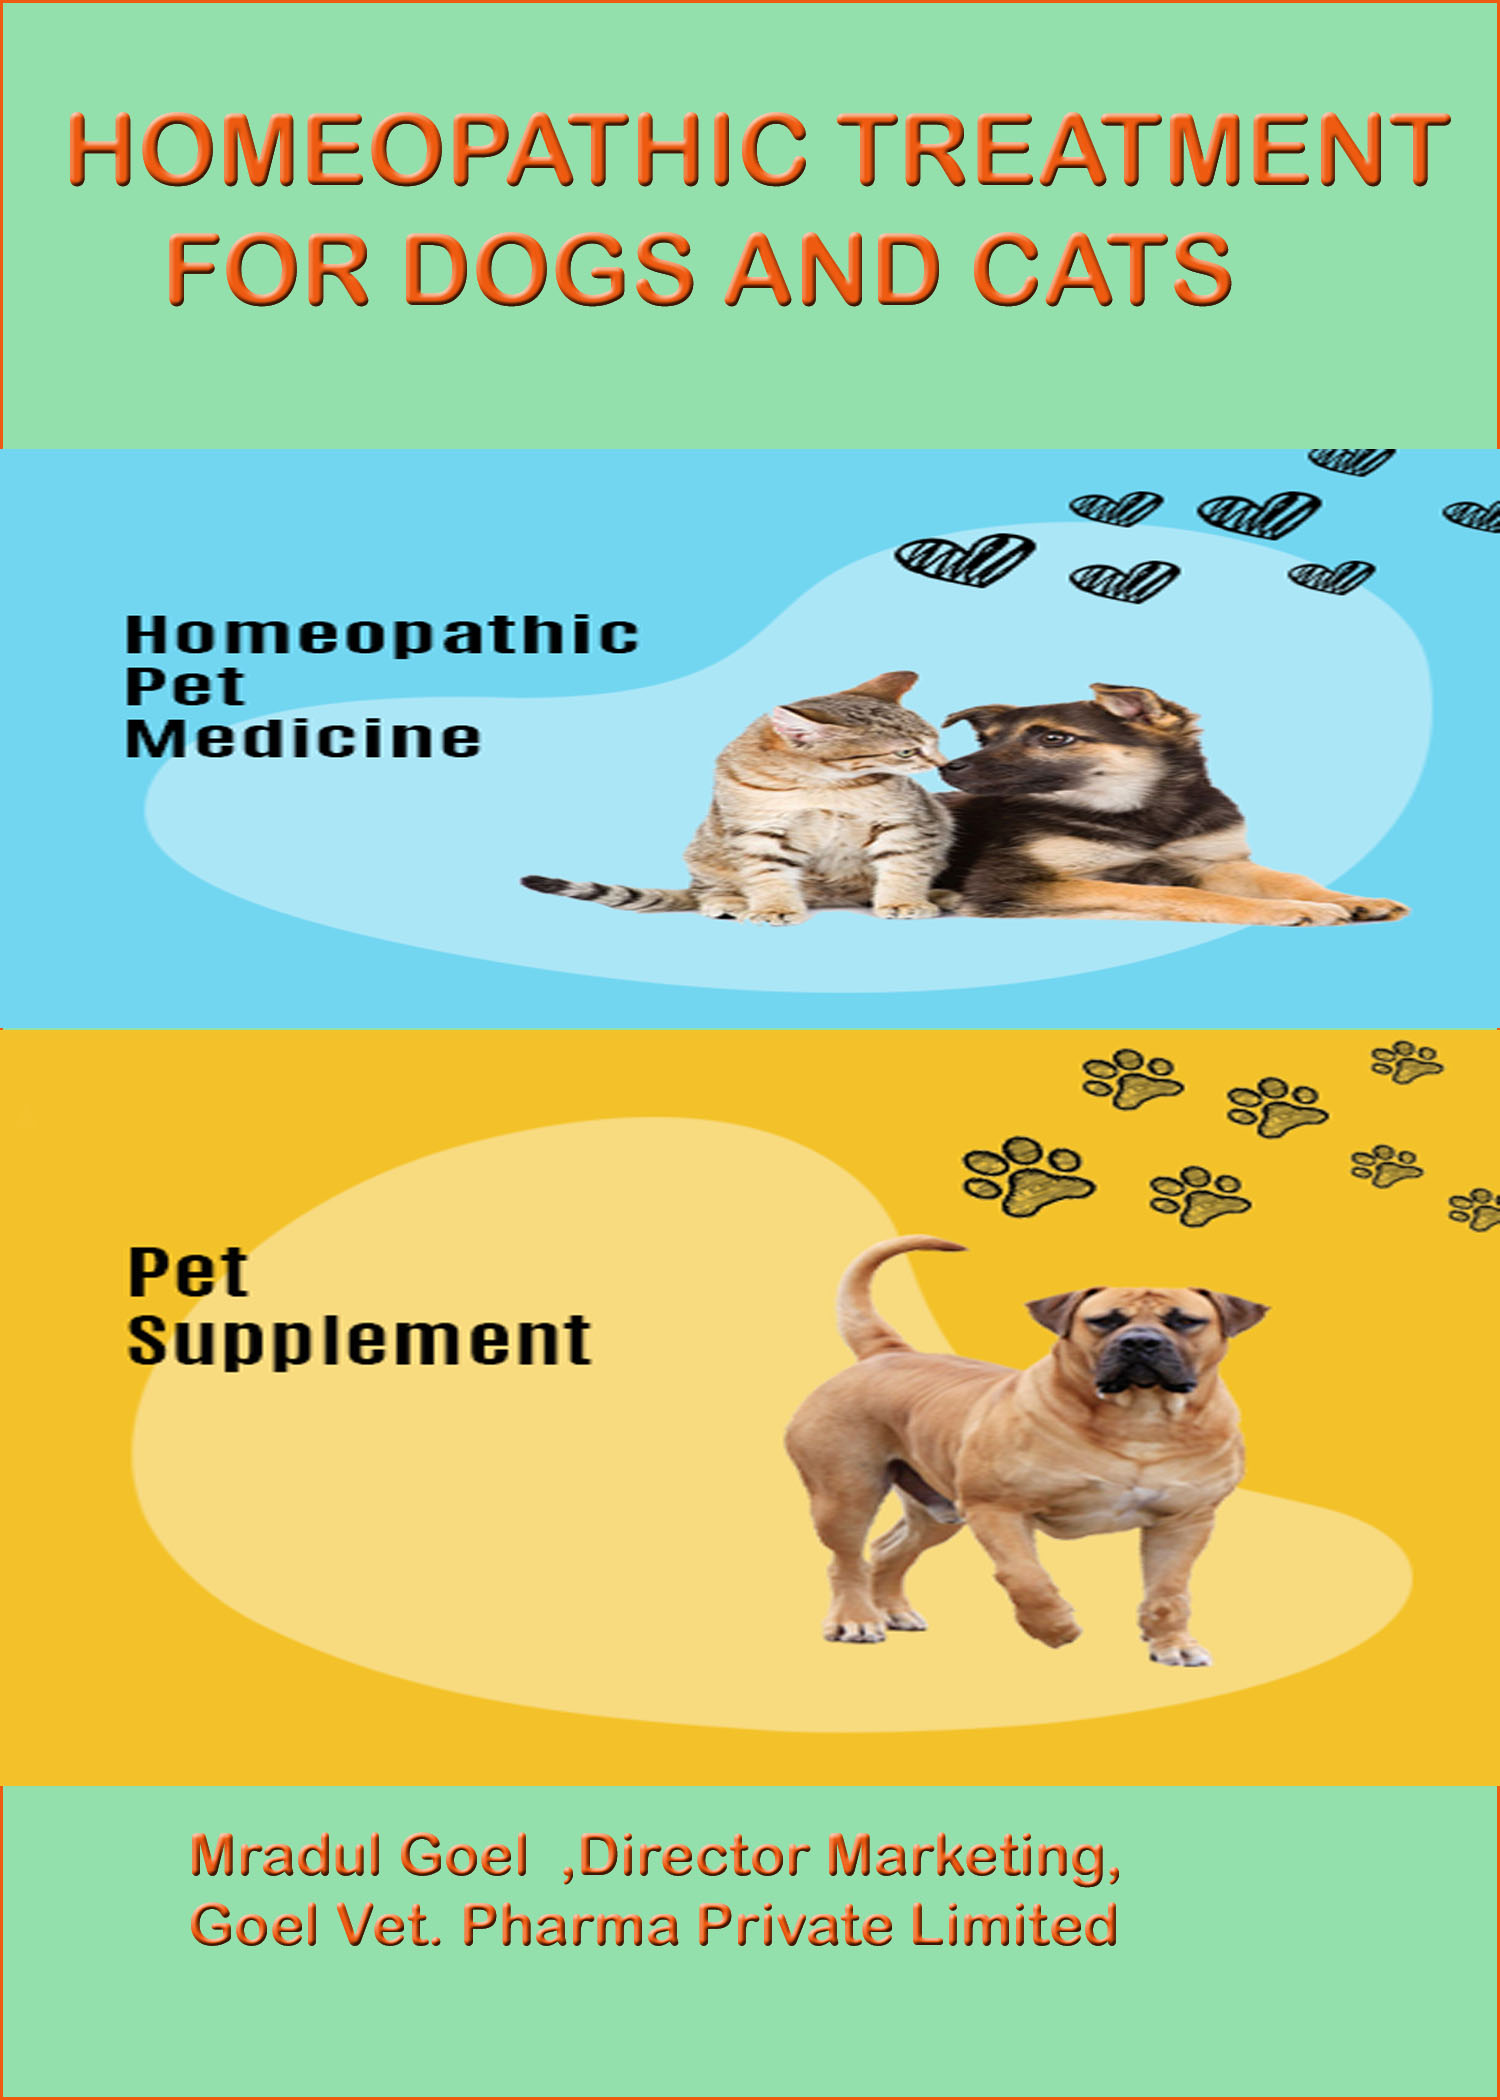 HOMEOPATHIC TREATMENT FOR DOGS AND CATS